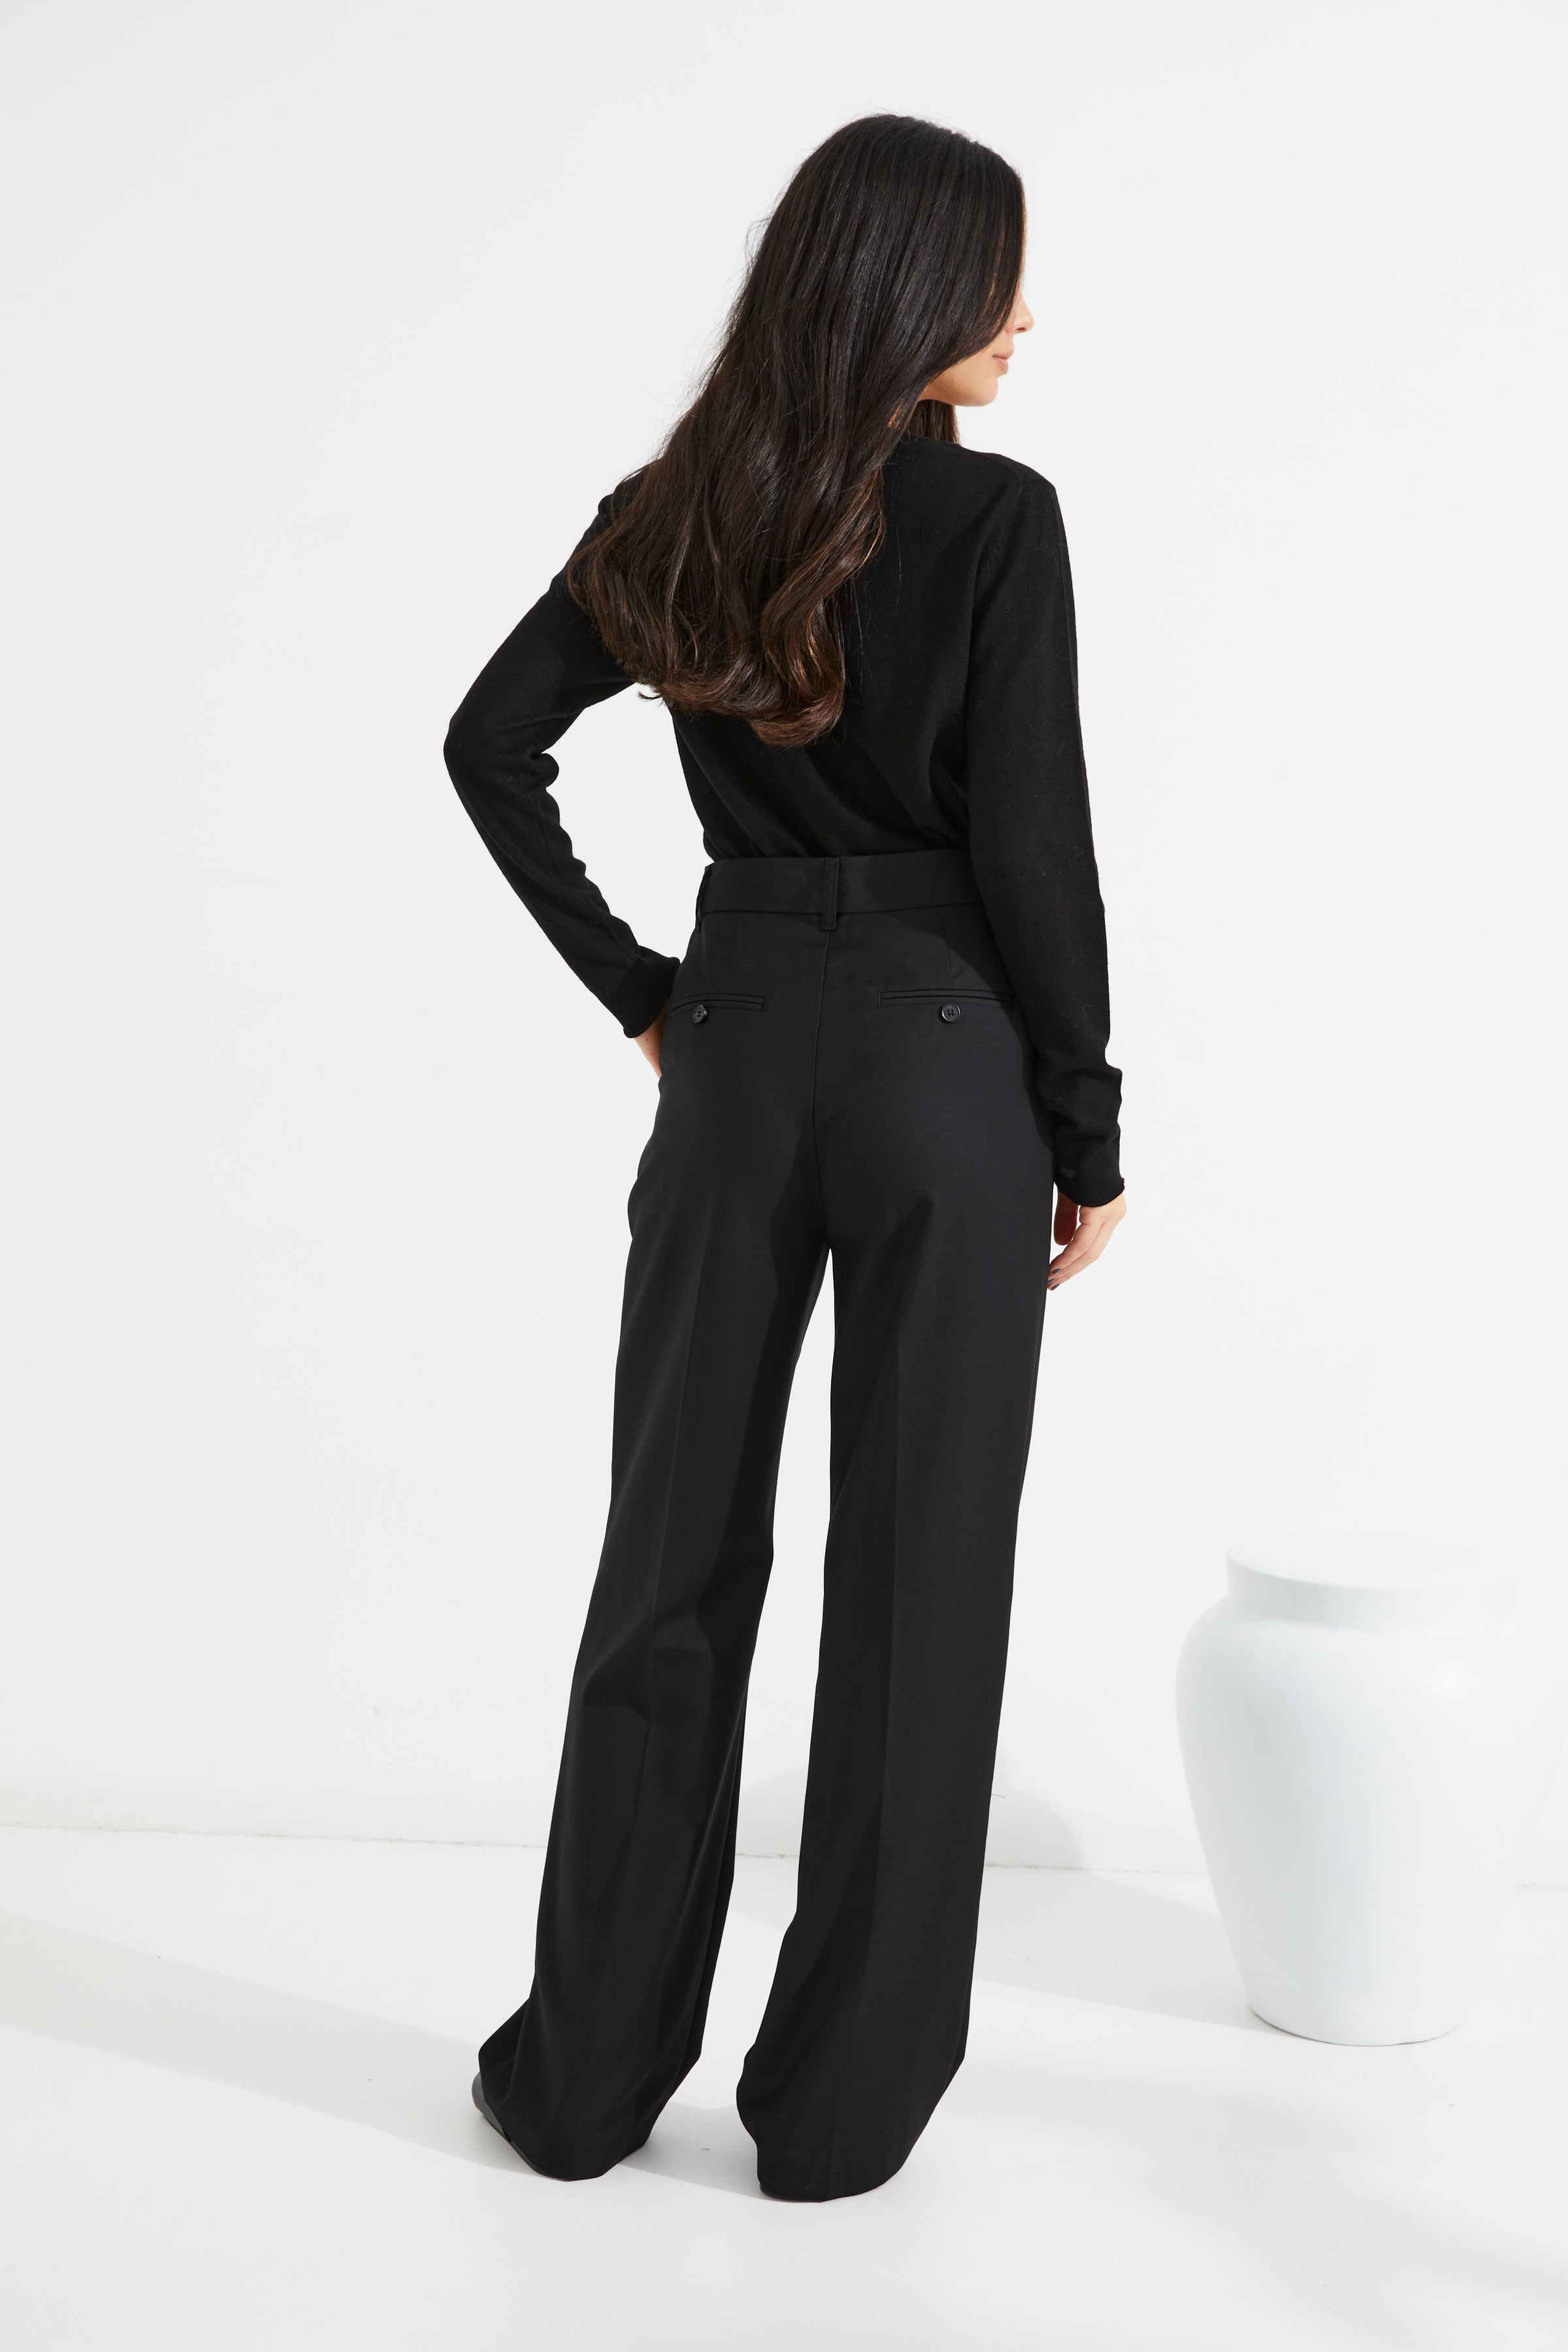 TUESDAY LABEL - Olympia Pant (Black)